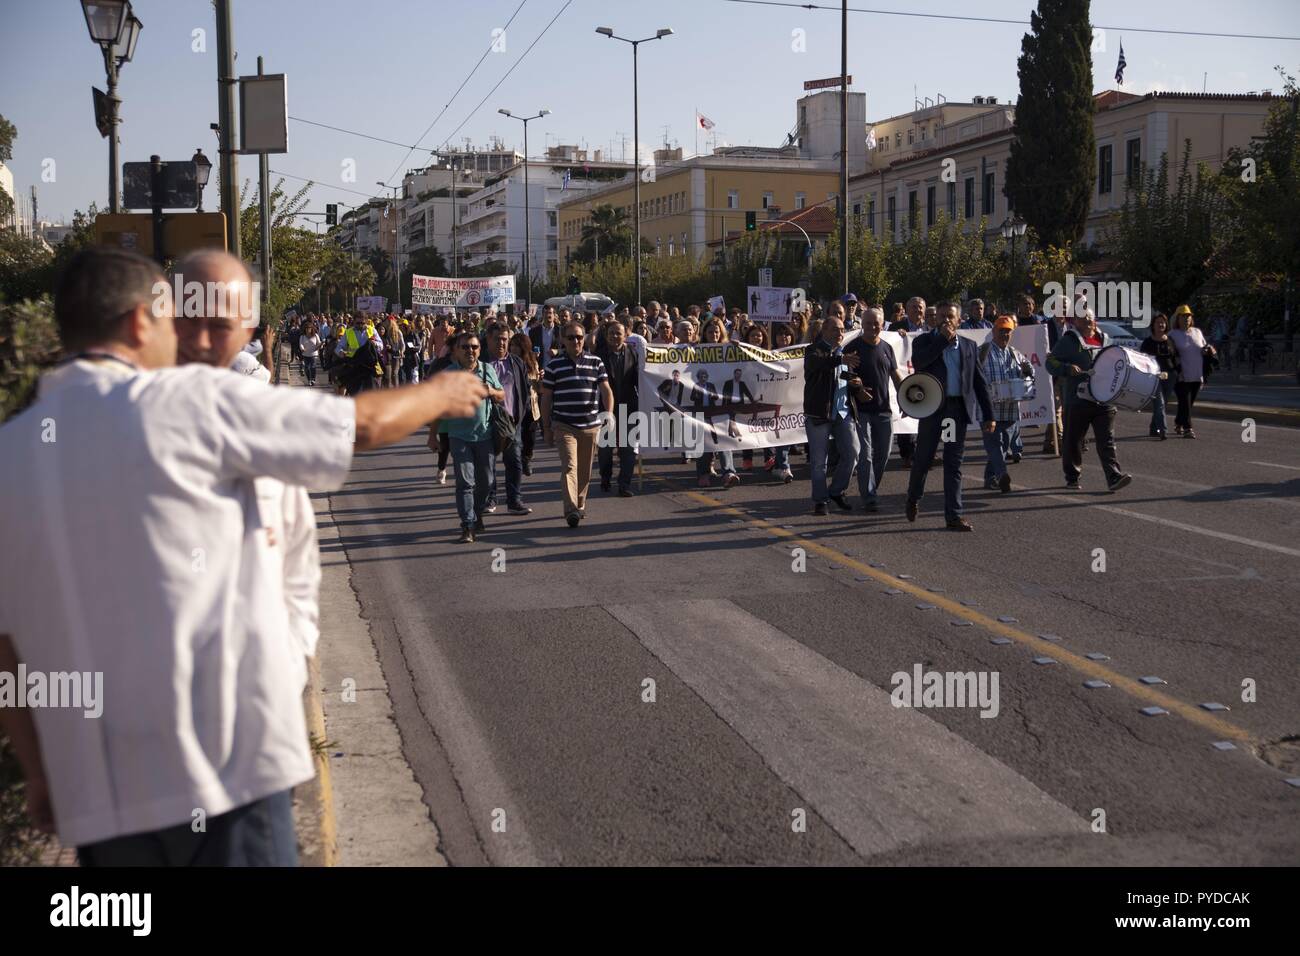 Employees of public hospitals in Greece protest against austerity measures and situation in Health Care Sector, demanding improved working conditions. 10.10.2018 | usage worldwide Stock Photo